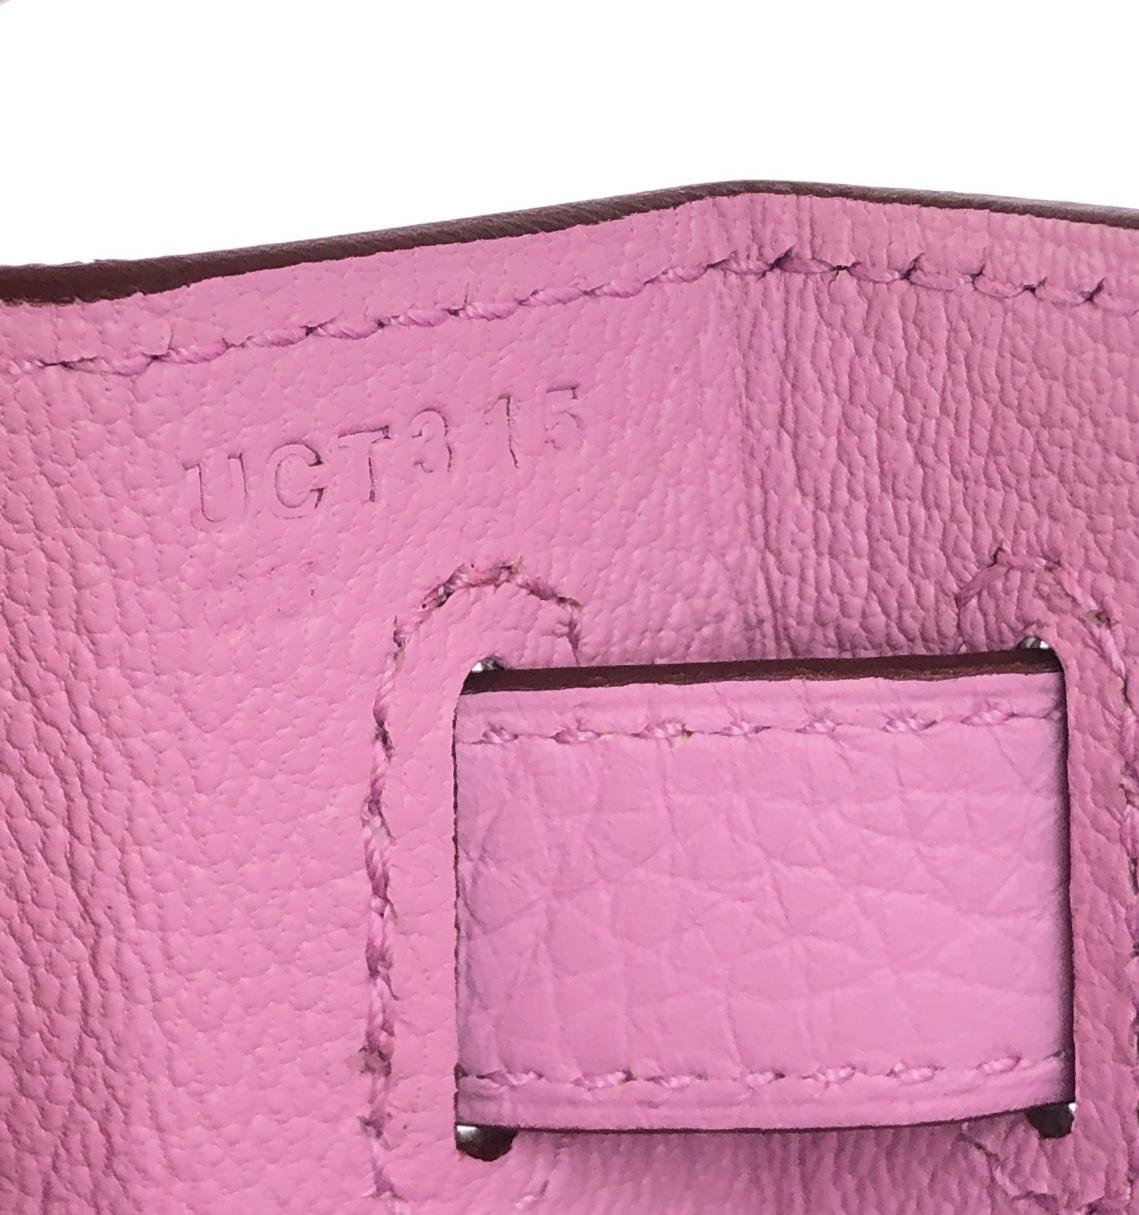 Hermes Kelly 28 Mauve Sylvester Pink Leather Palladium Hardware NEW For Sale 4